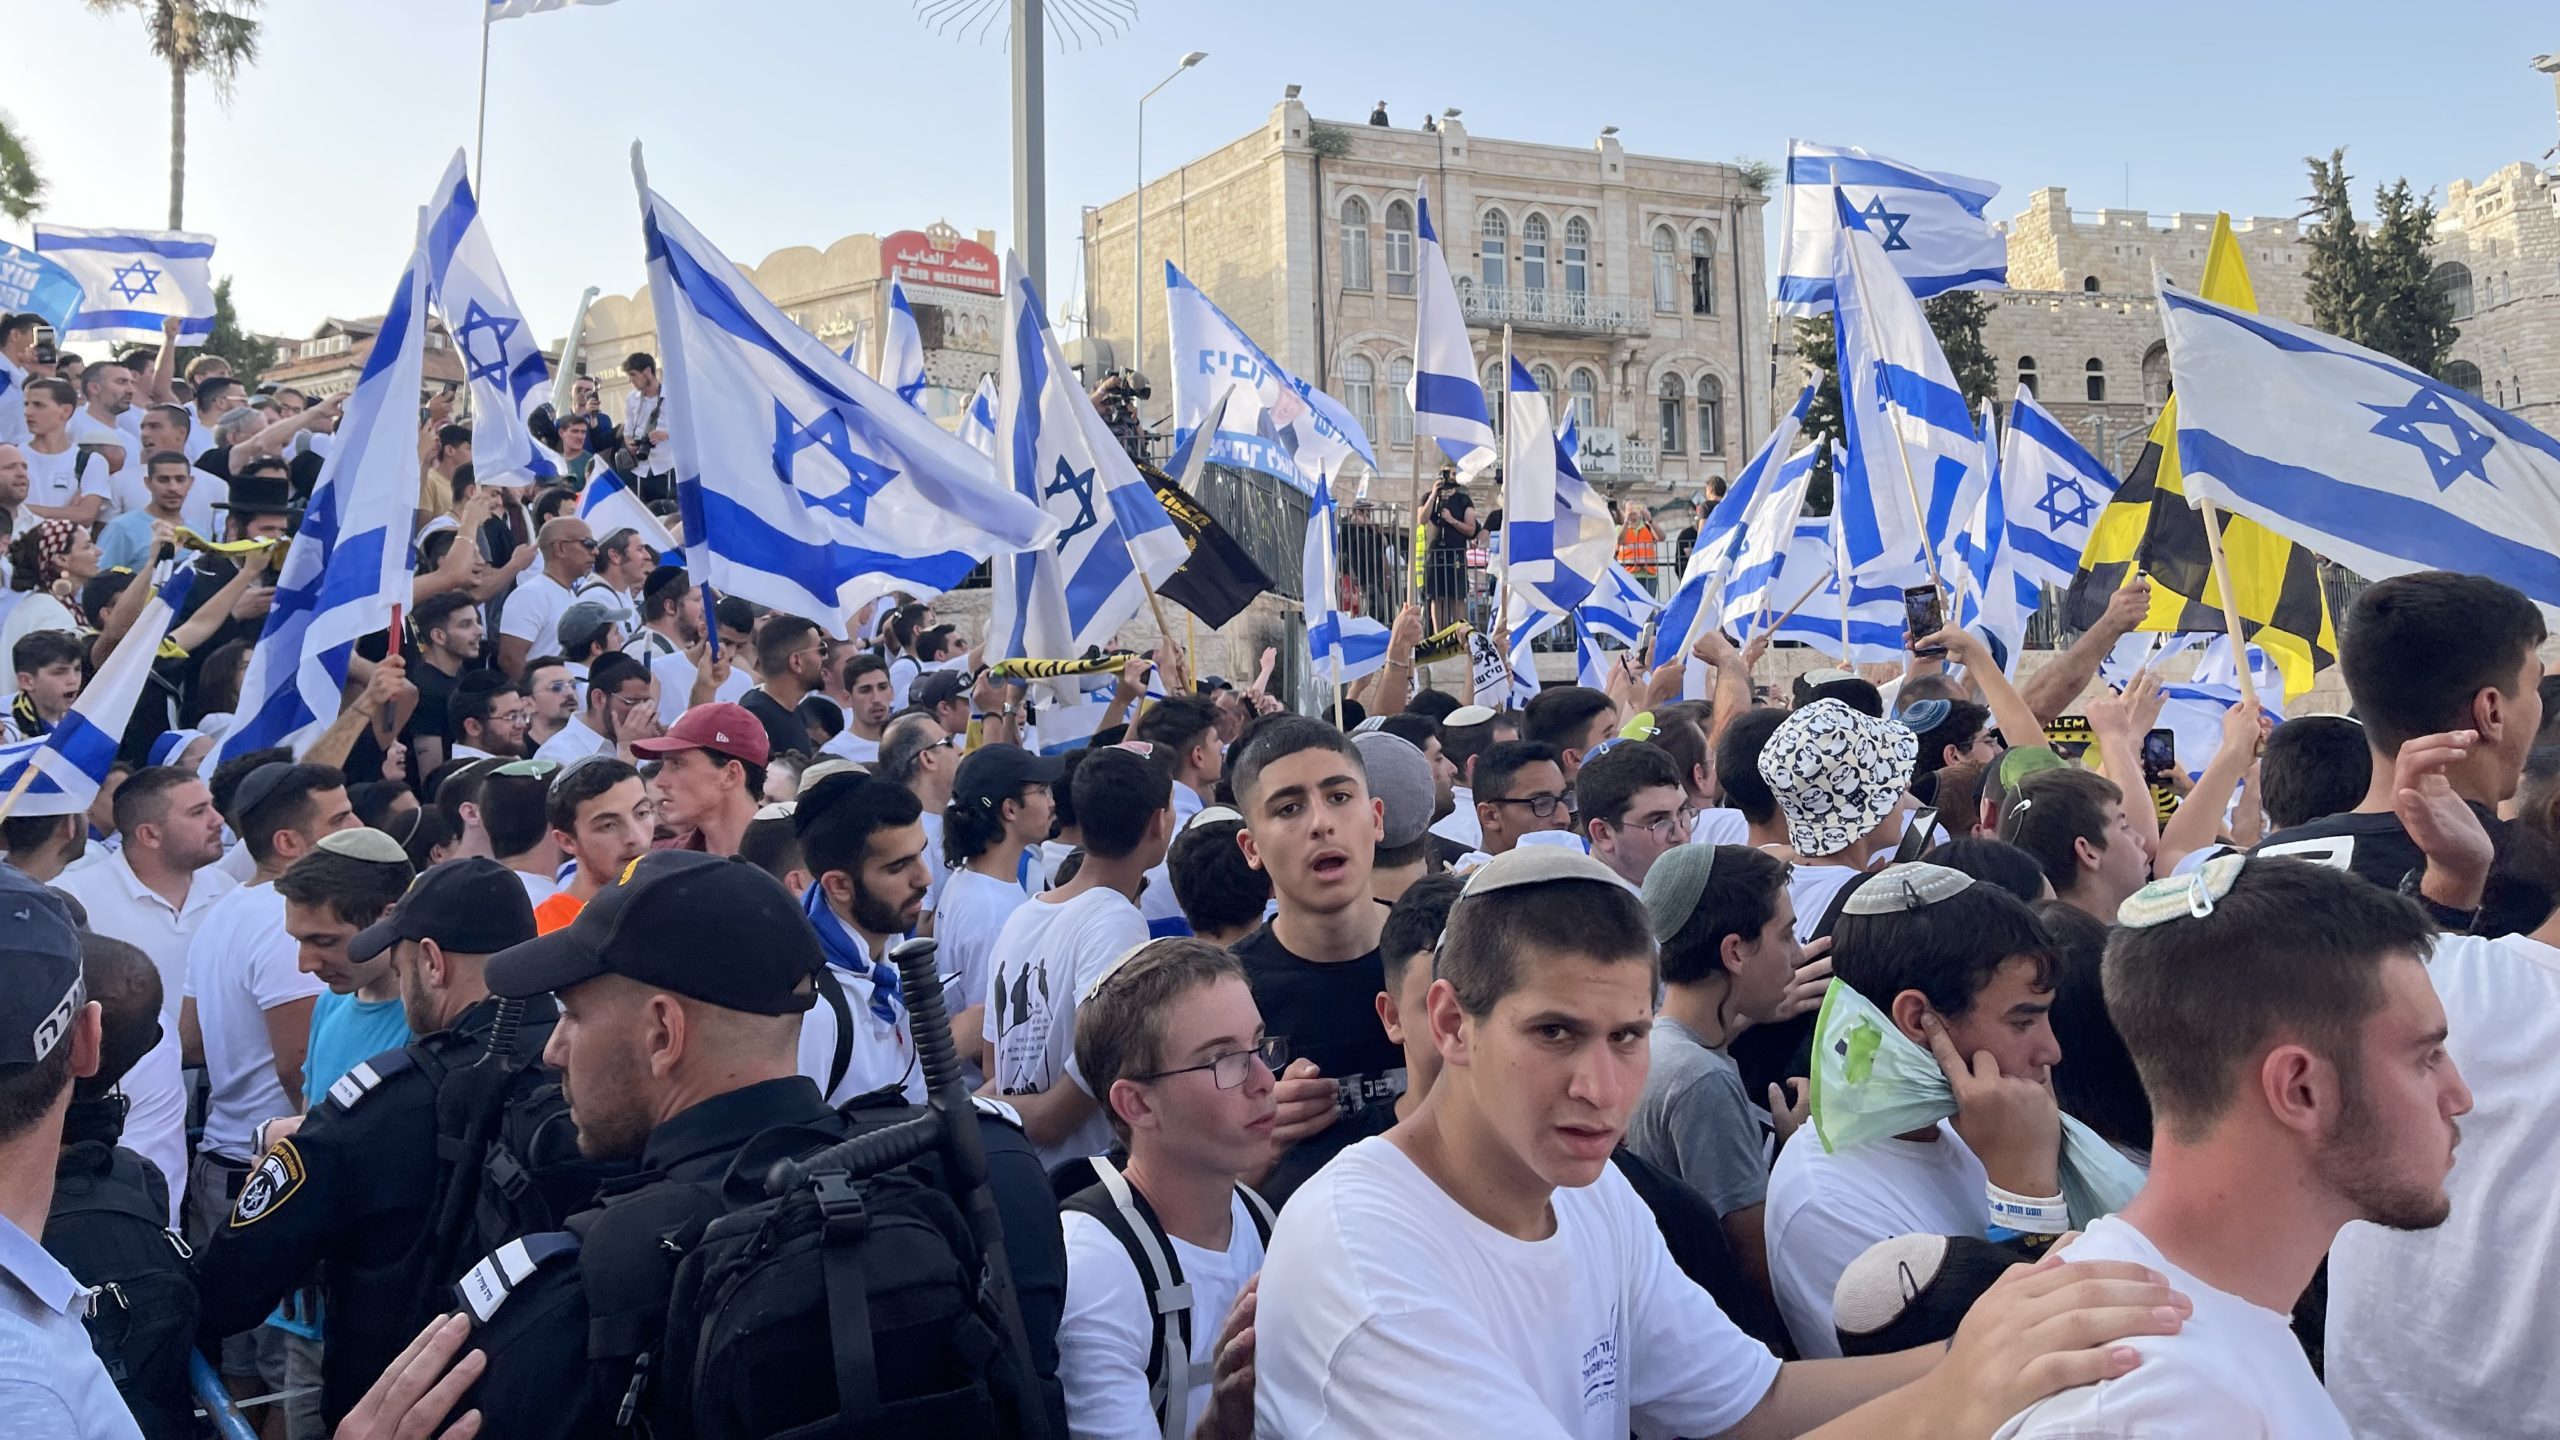 Heavy Police Presence as Jerusalem Hosts Nationalist March Amid Tensions